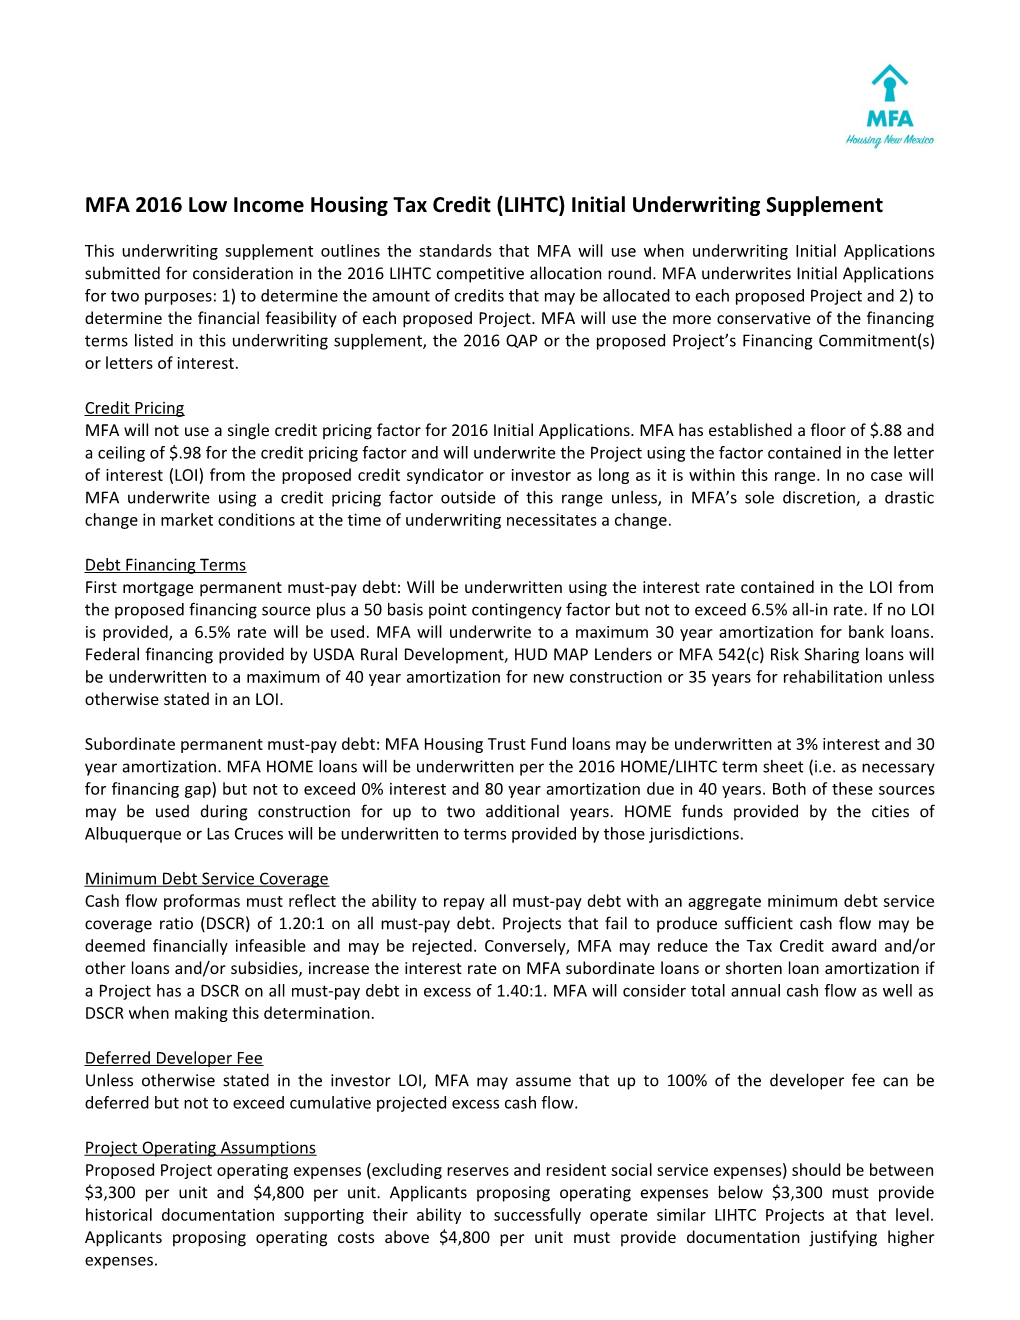 MFA 2016 Low Income Housing Tax Credit (LIHTC) Initial Underwriting Supplement